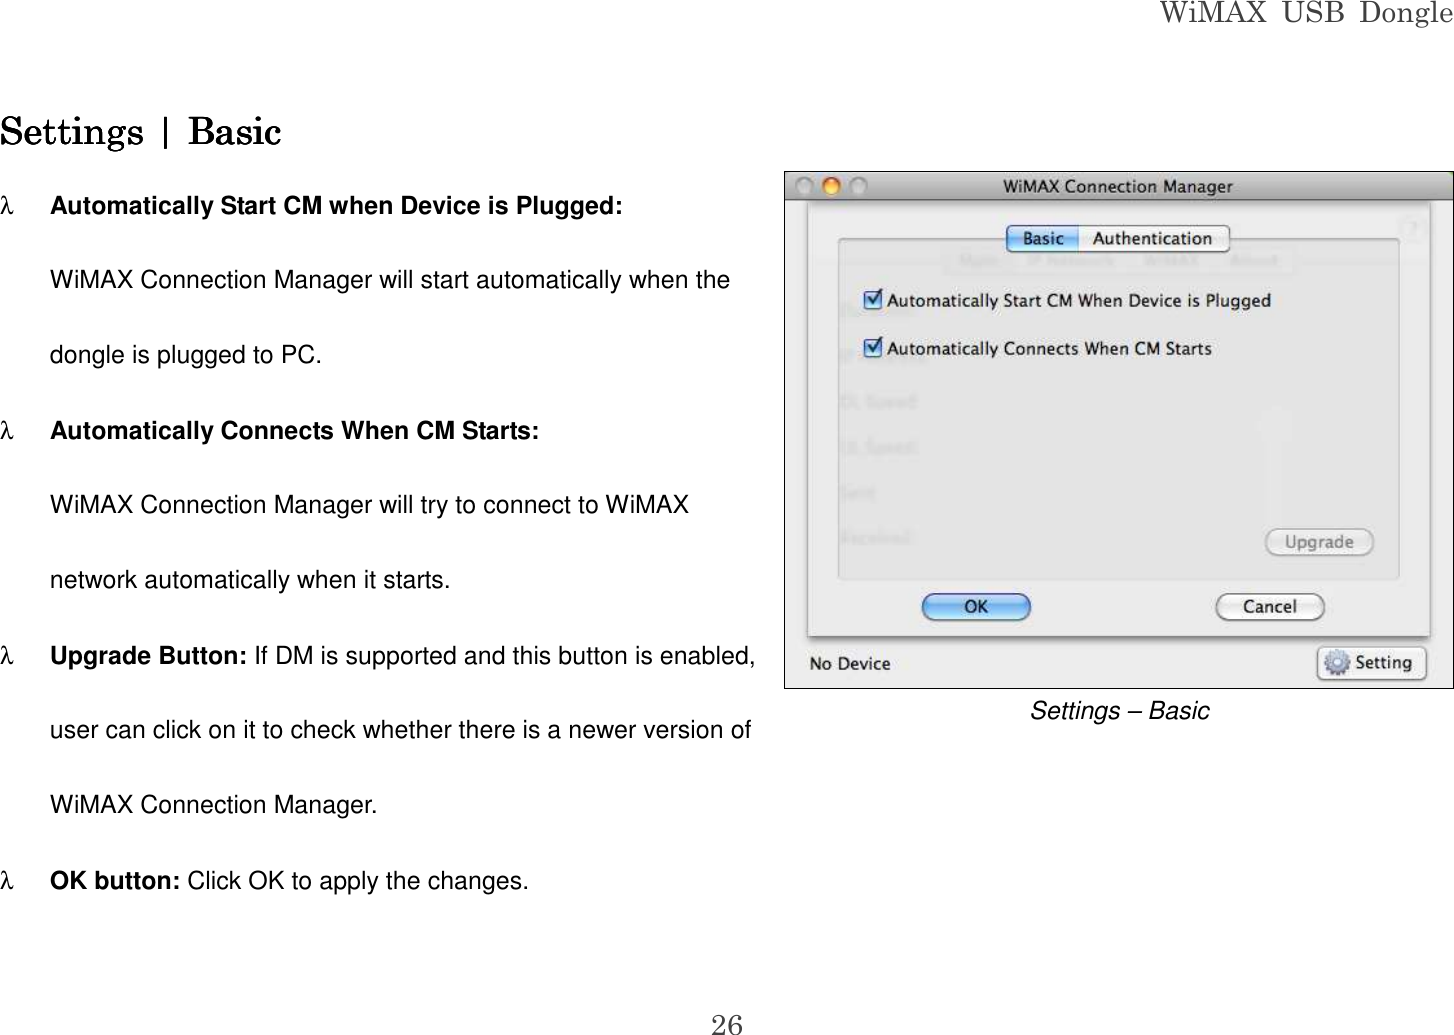 WiMAX  USB  Dongle  26 Settings | BasicSettings | BasicSettings | BasicSettings | Basic    λ Automatically Start CM when Device is Plugged: WiMAX Connection Manager will start automatically when the dongle is plugged to PC. λ Automatically Connects When CM Starts: WiMAX Connection Manager will try to connect to WiMAX network automatically when it starts. λ Upgrade Button: If DM is supported and this button is enabled, user can click on it to check whether there is a newer version of WiMAX Connection Manager. λ OK button: Click OK to apply the changes.  Settings – Basic 